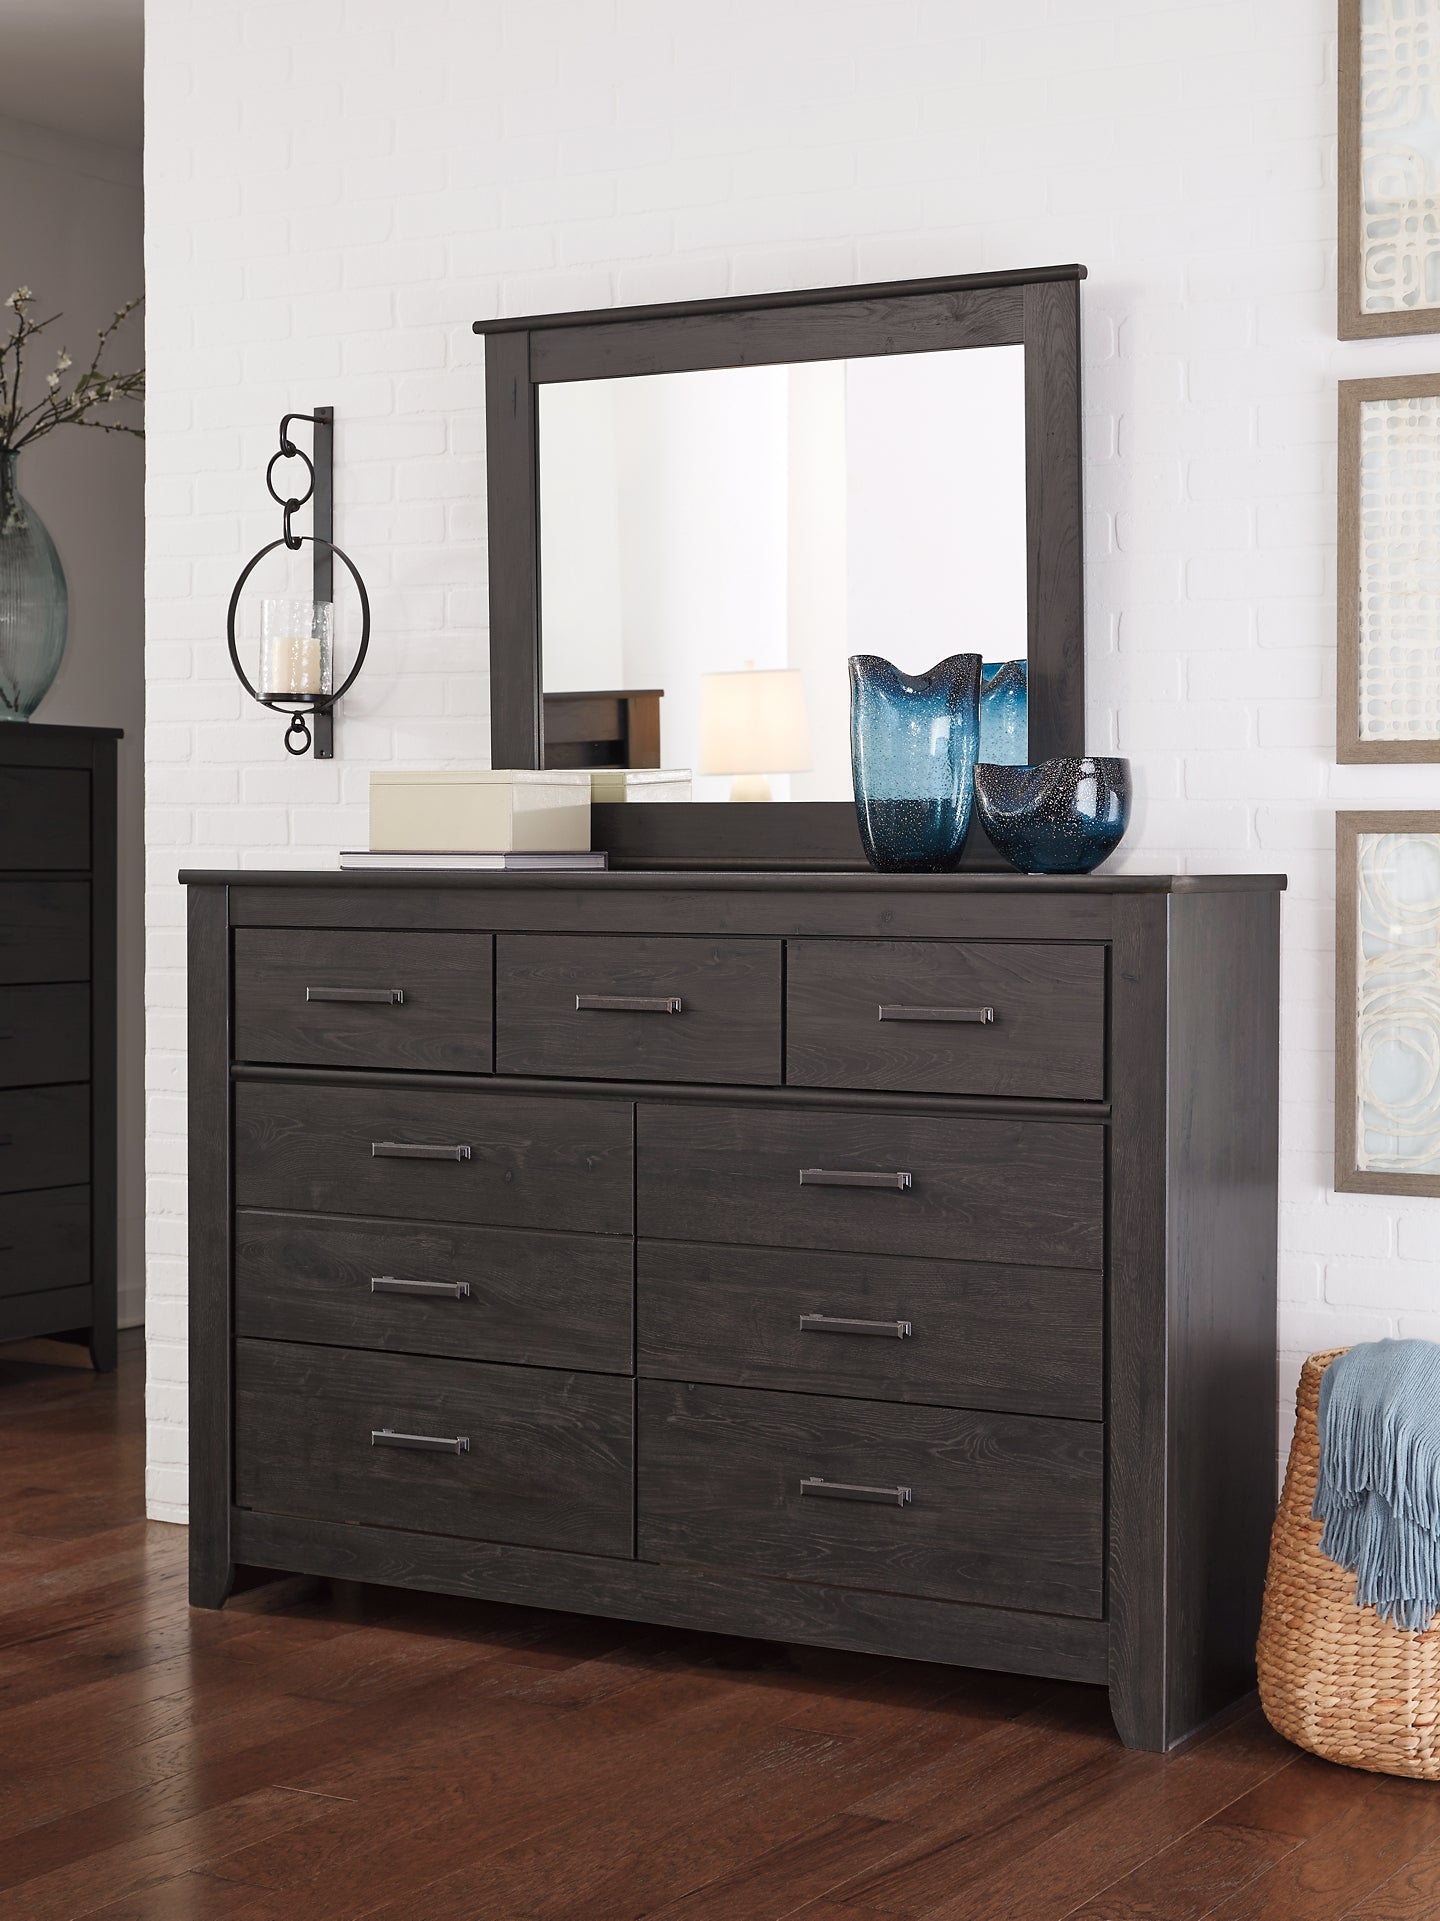 Brinxton Full Panel Headboard with Mirrored Dresser, Chest and 2 Nightstands